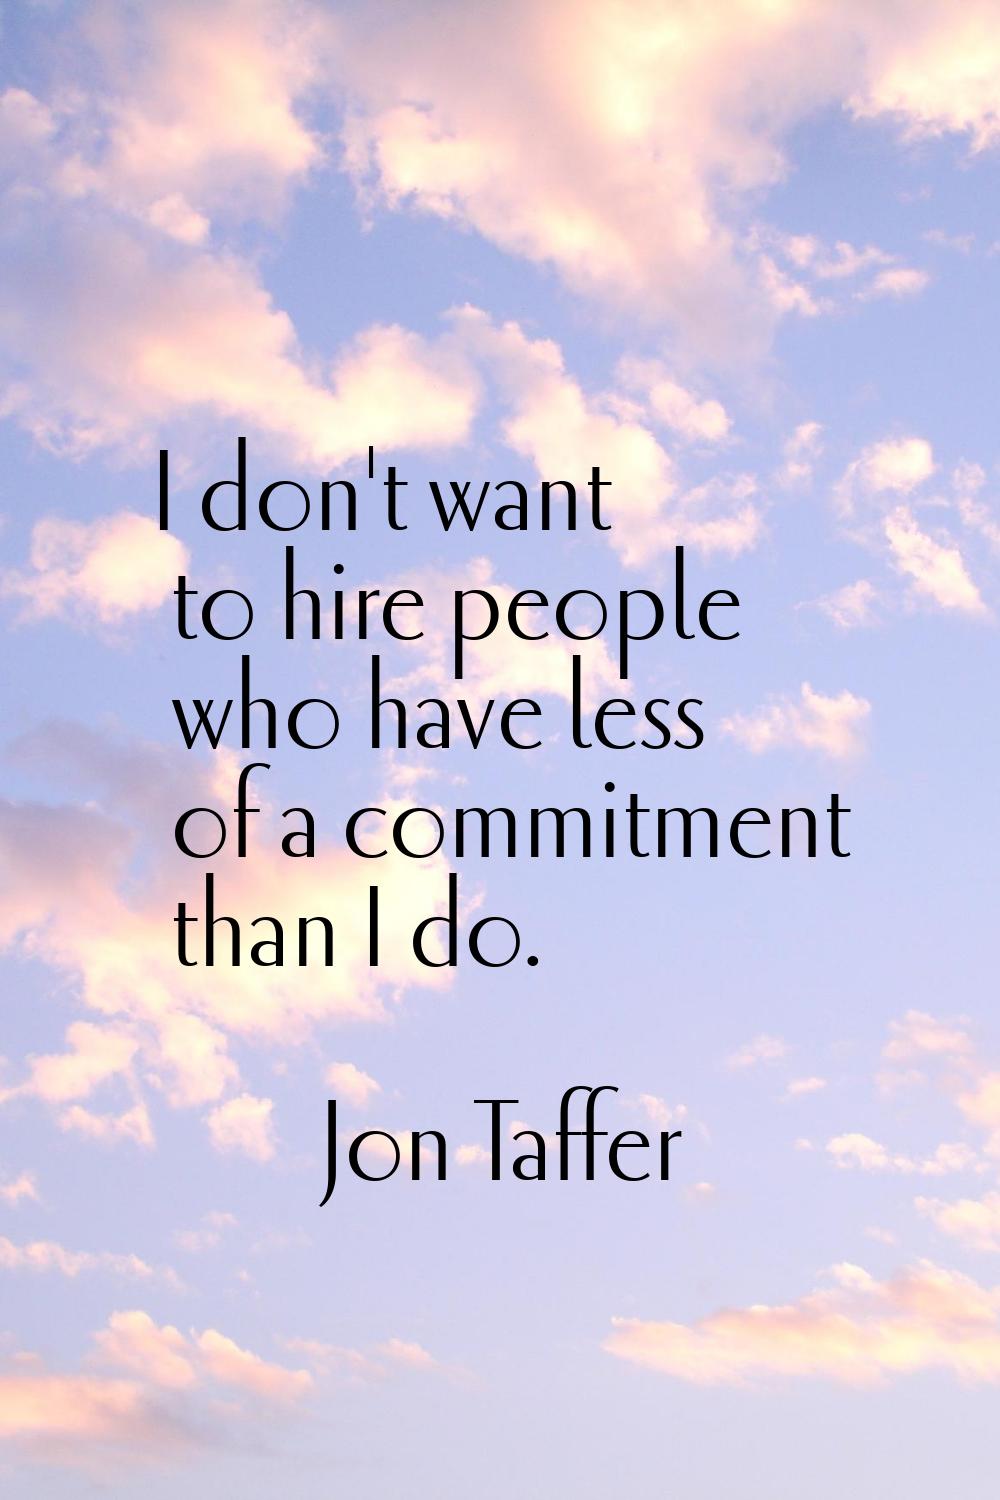 I don't want to hire people who have less of a commitment than I do.